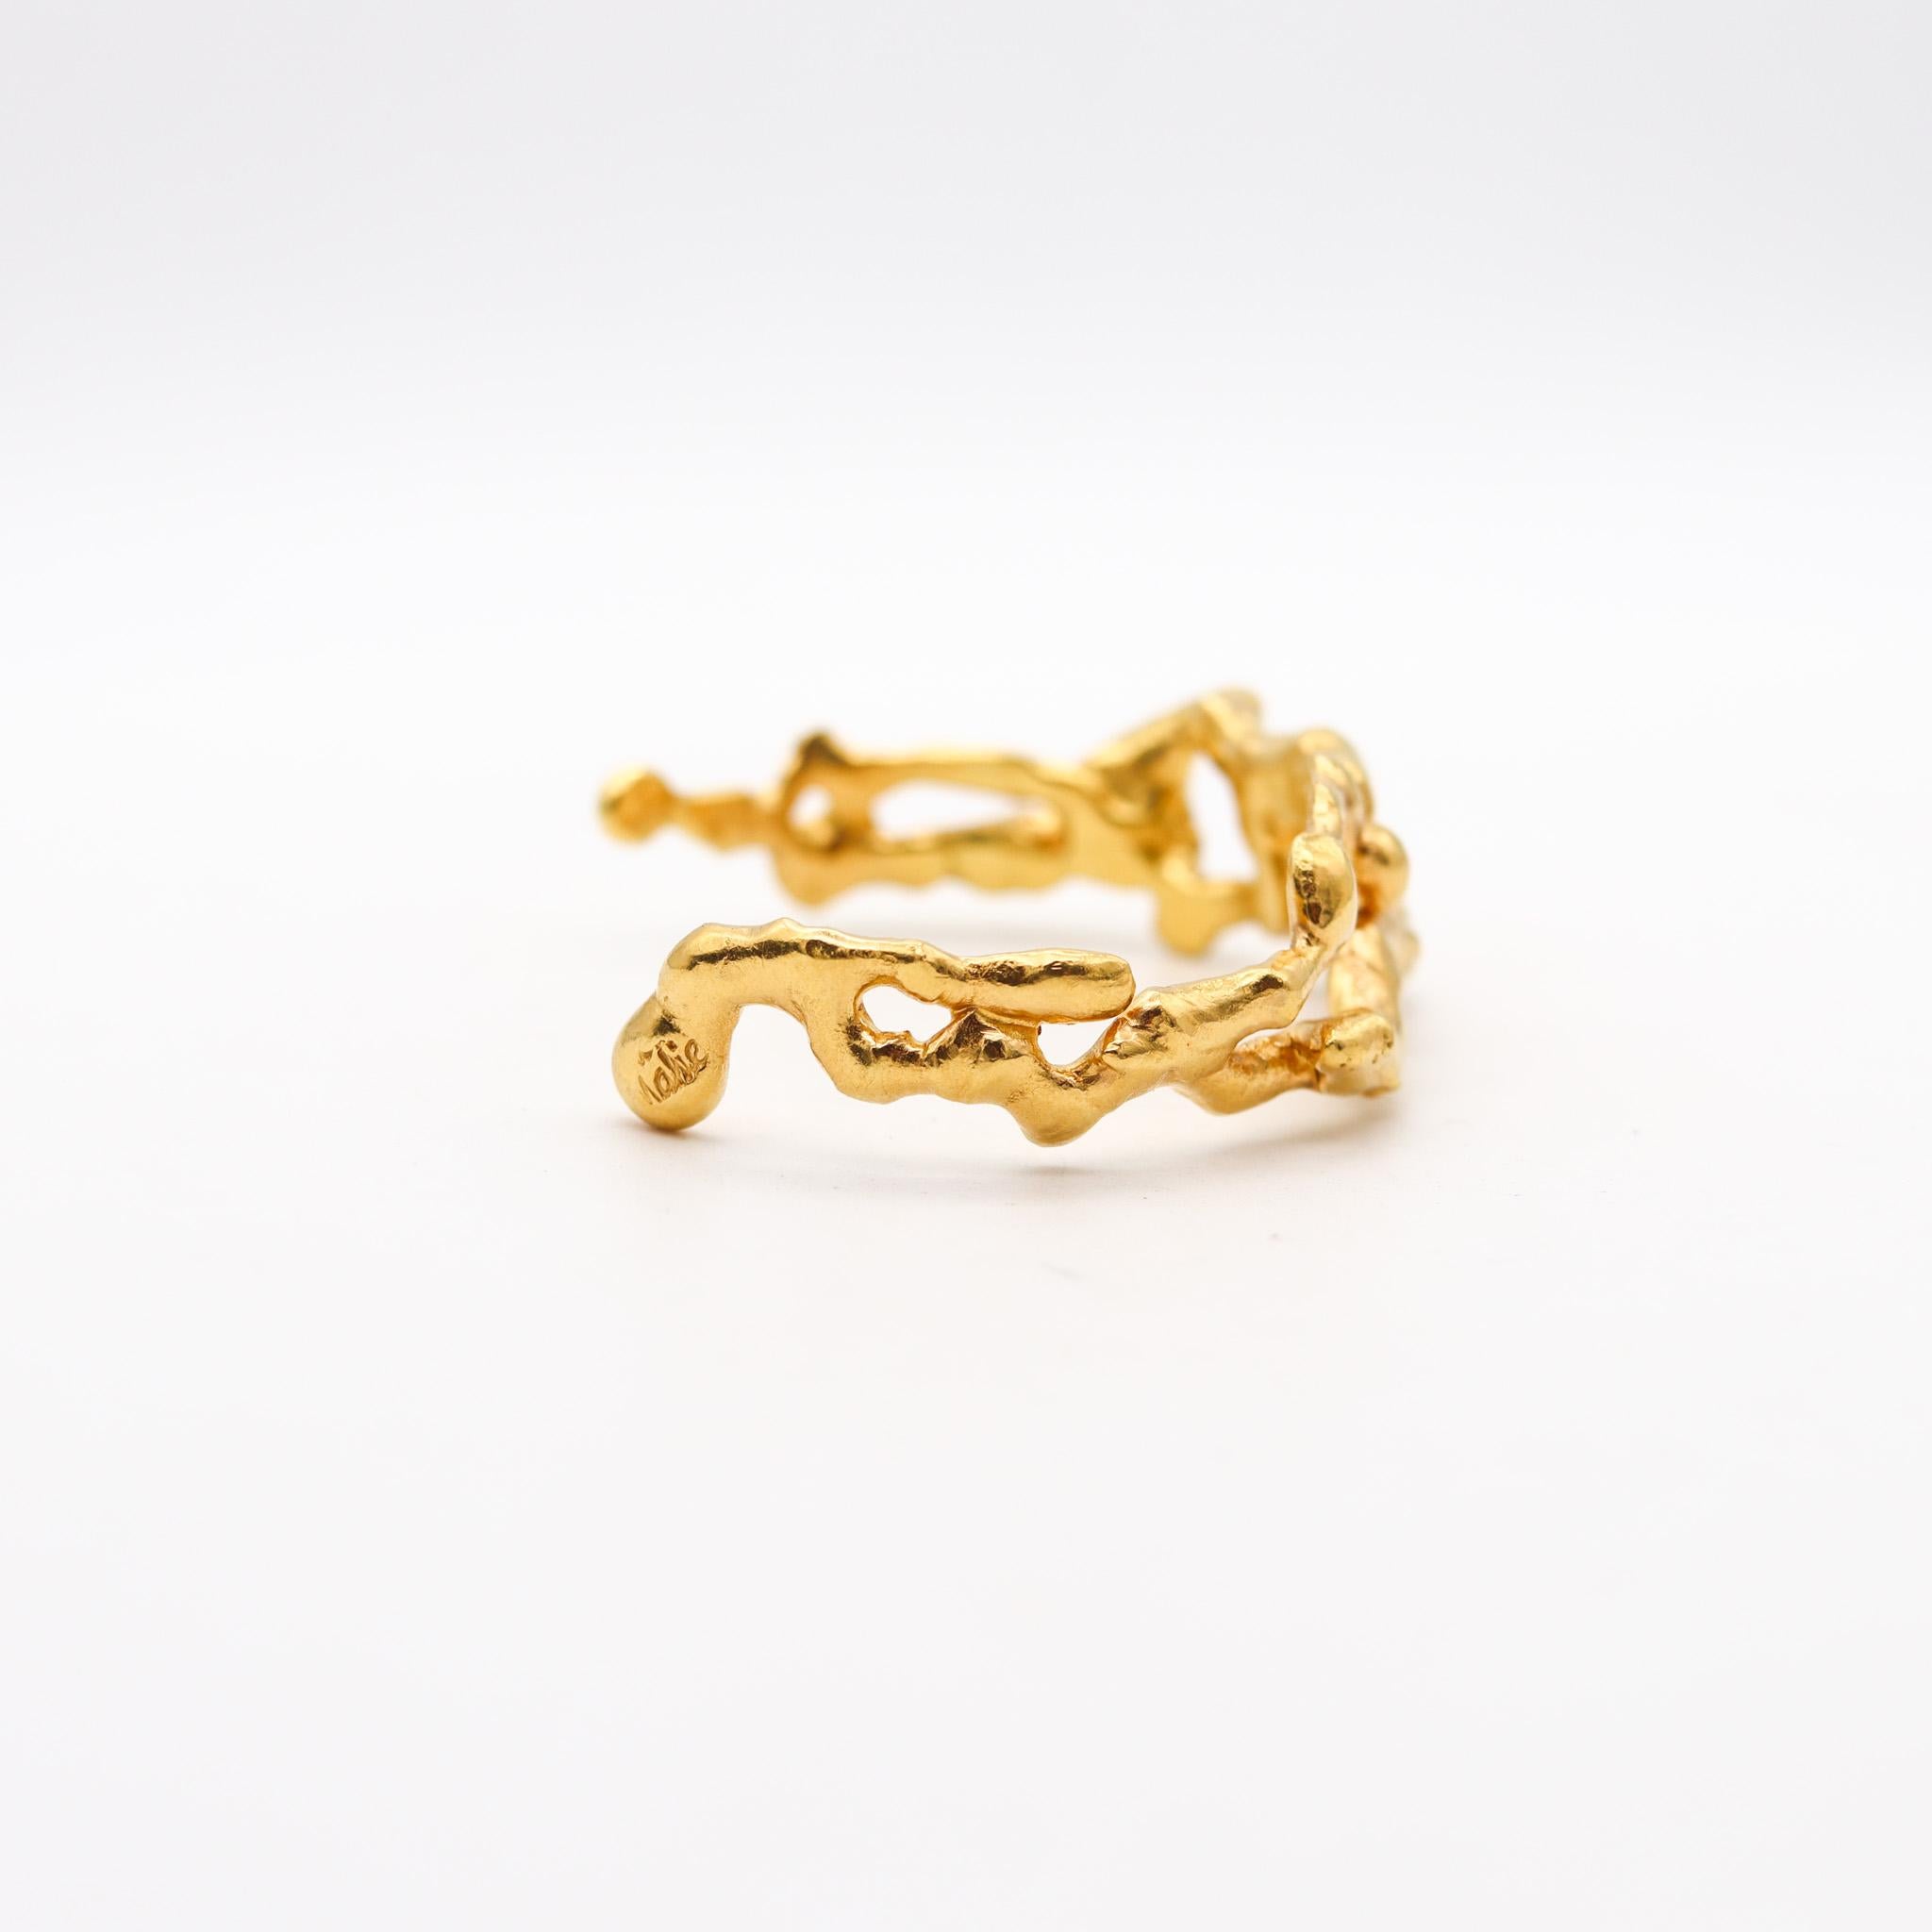 Jean Mahie 1970 Paris Sculptural Cuff Bracelet In Solid 22Kt Yellow Gold In Excellent Condition For Sale In Miami, FL